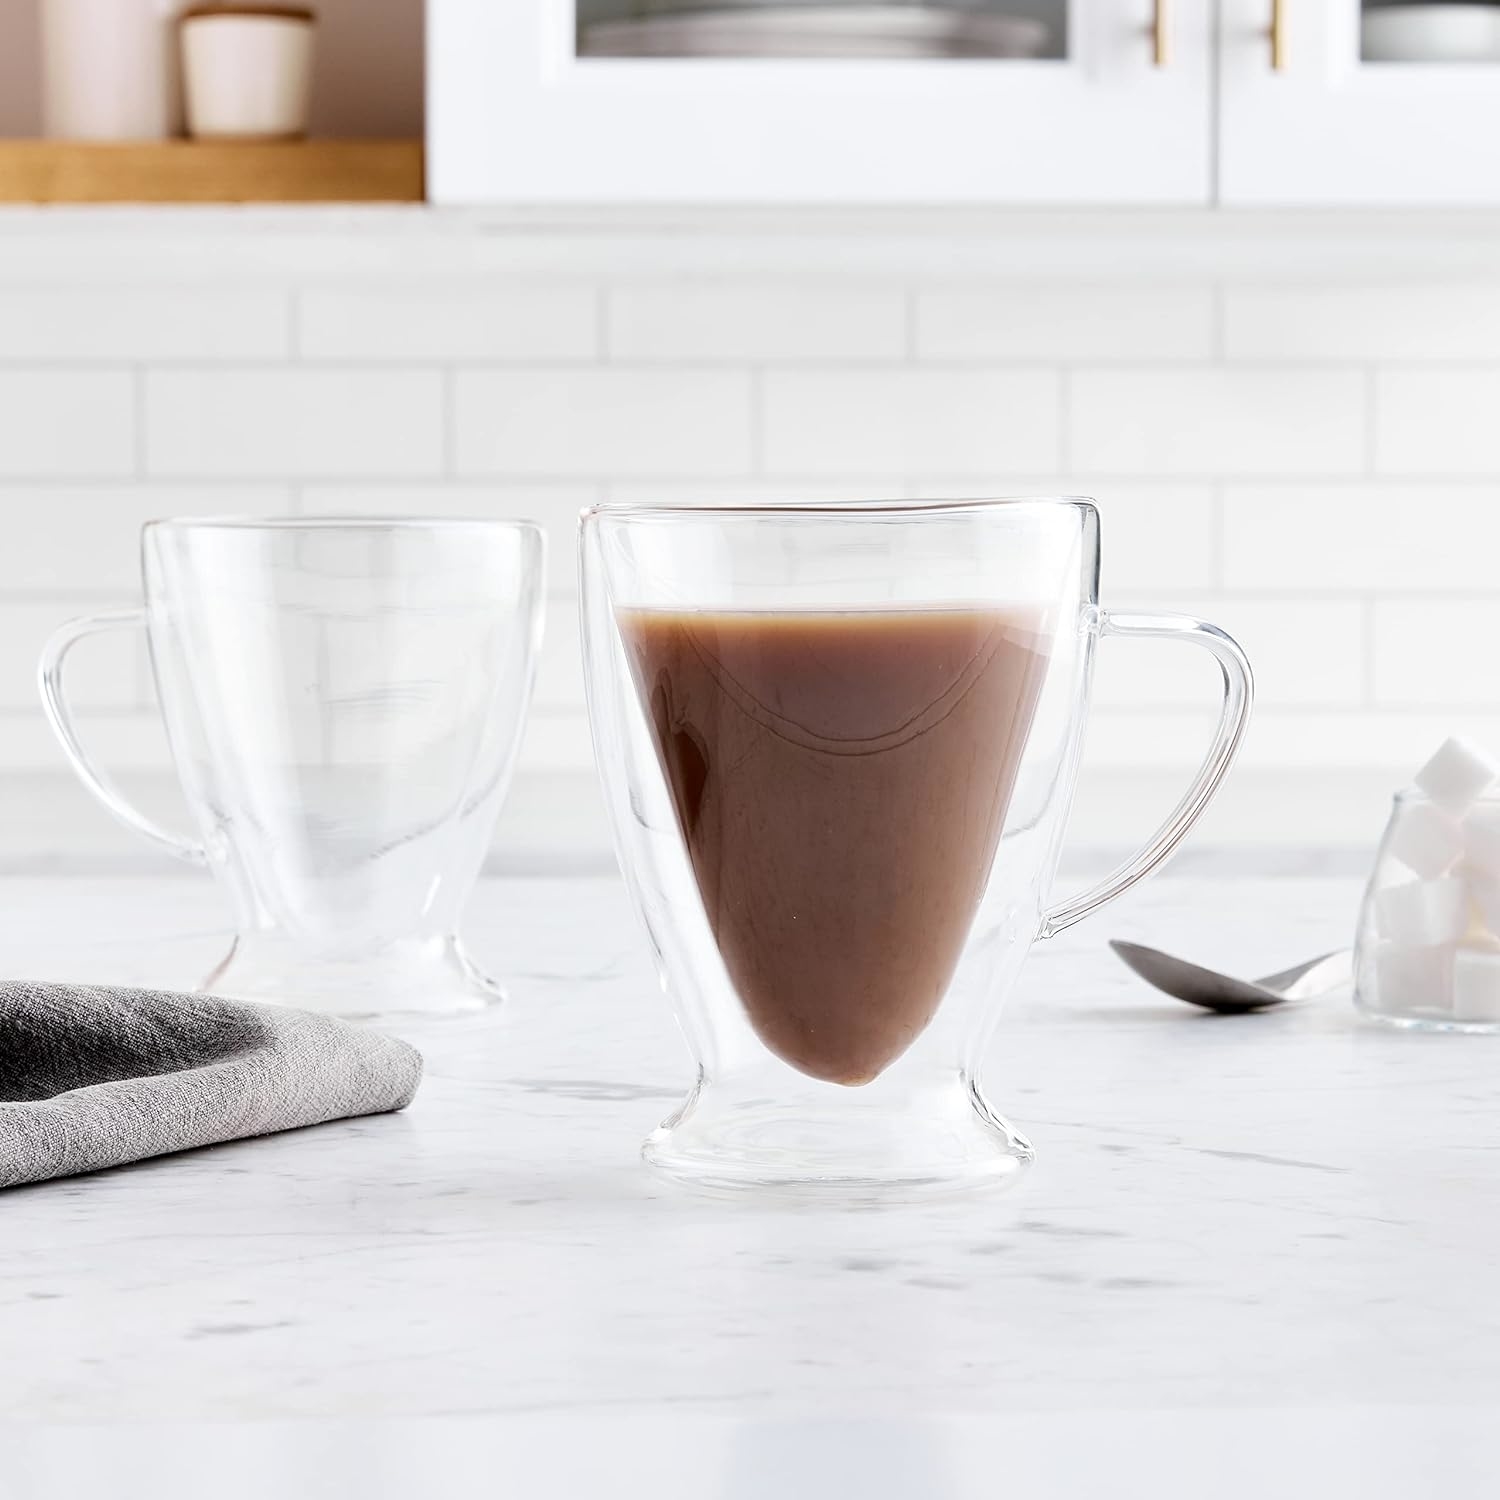 Double-walled glass mugs on a kitchen counter, one filled with coffee